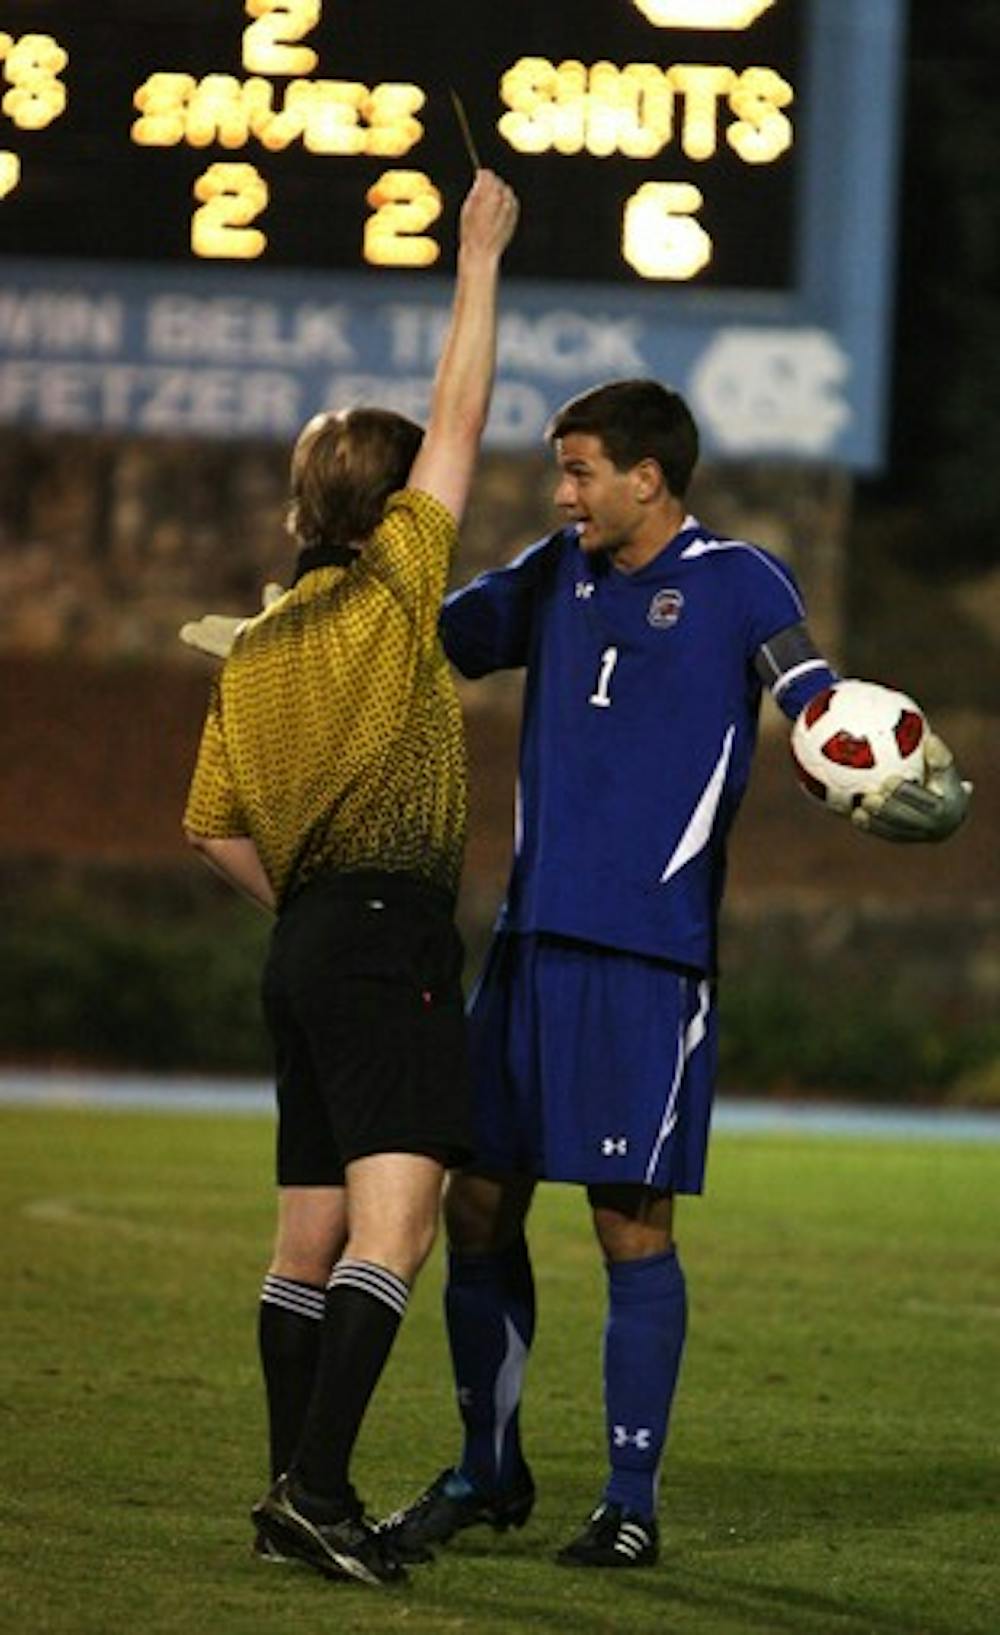 South Carolina goalie Jimmy Maurer argues with the ref after being issued a yellow card in the 55th minute of a physical match.